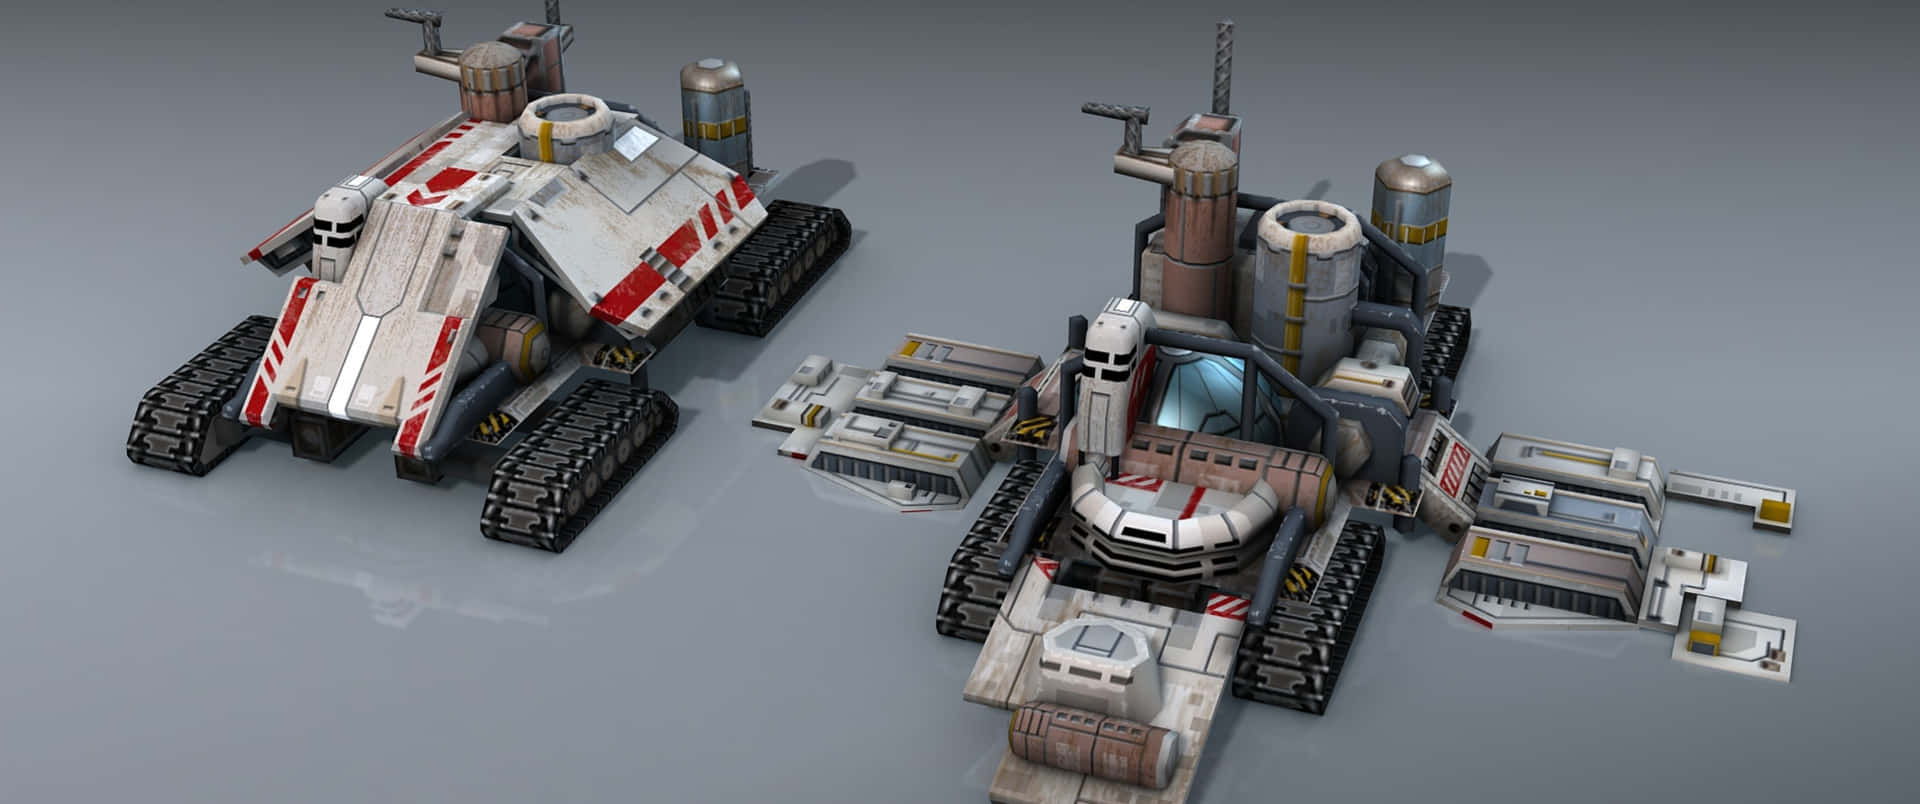 Two Tanks Are Shown On A Gray Background